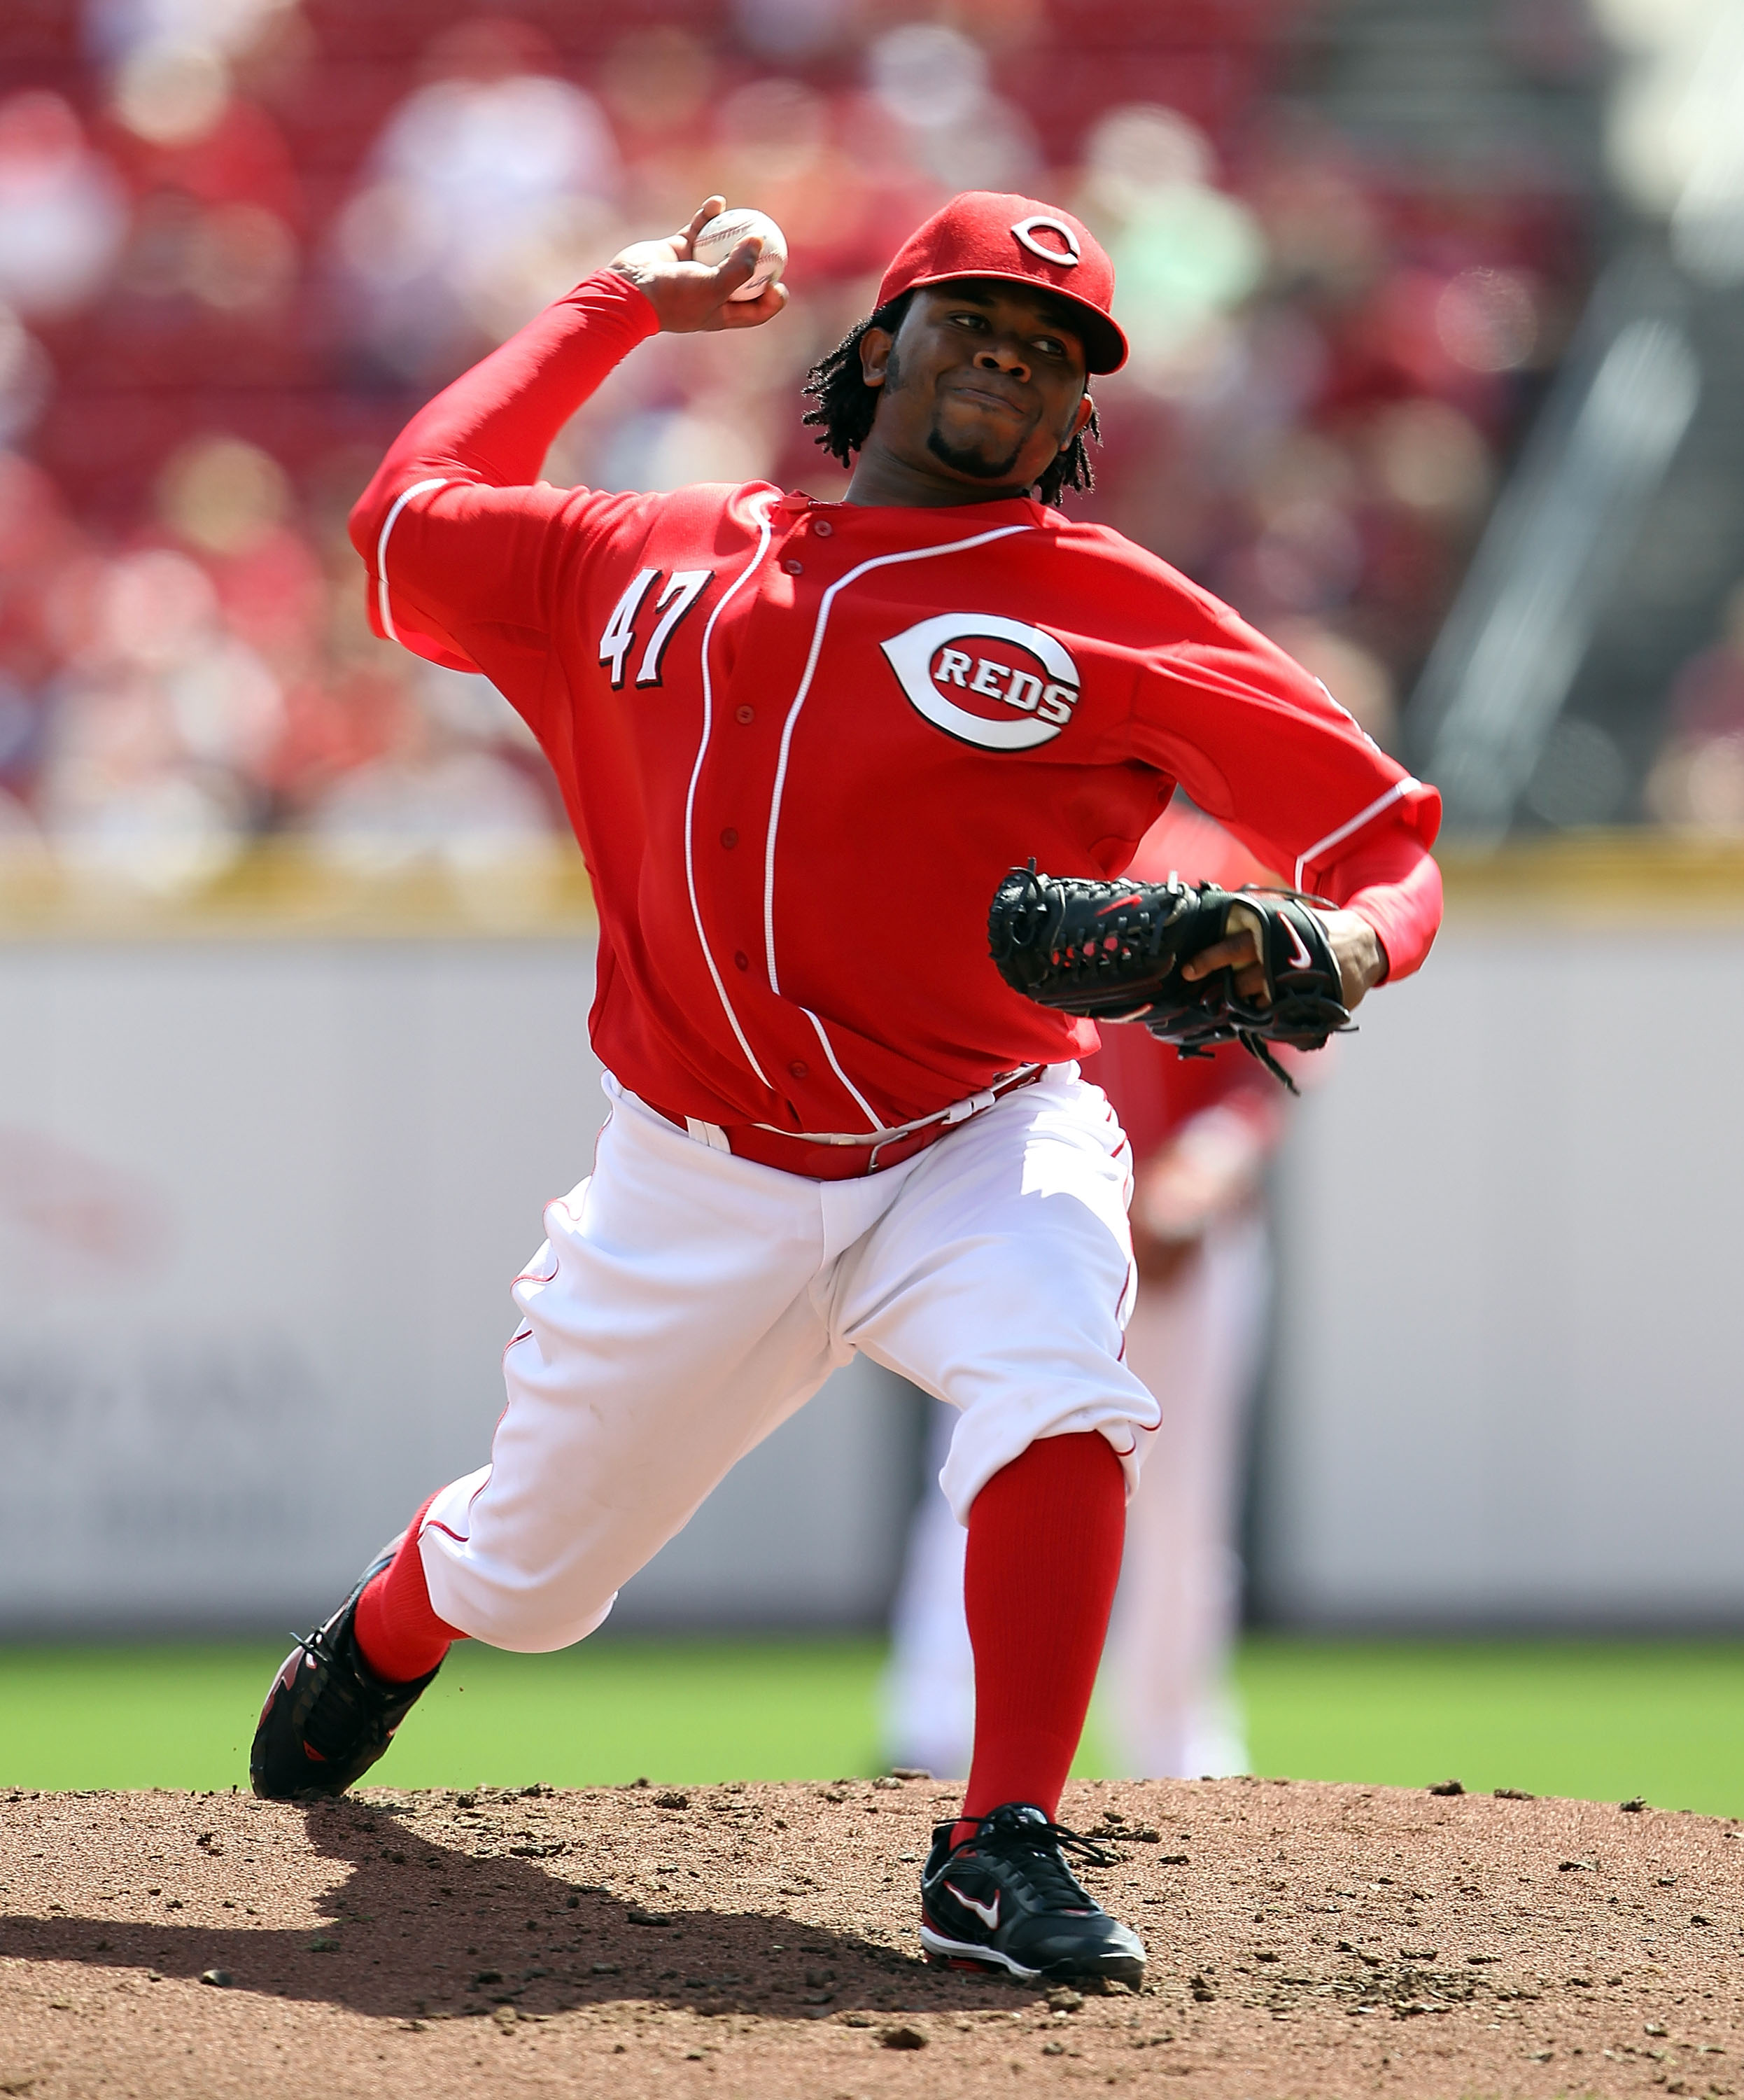 CINCINNATI - SEPTEMBER 12:  Johnny Cueto #47 of the Cincinnati Reds throws a pitch during the game against the Pittsburgh Pirates at Great American Ballpark on September 12, 2010 in Cincinnati, Ohio.  (Photo by Andy Lyons/Getty Images)